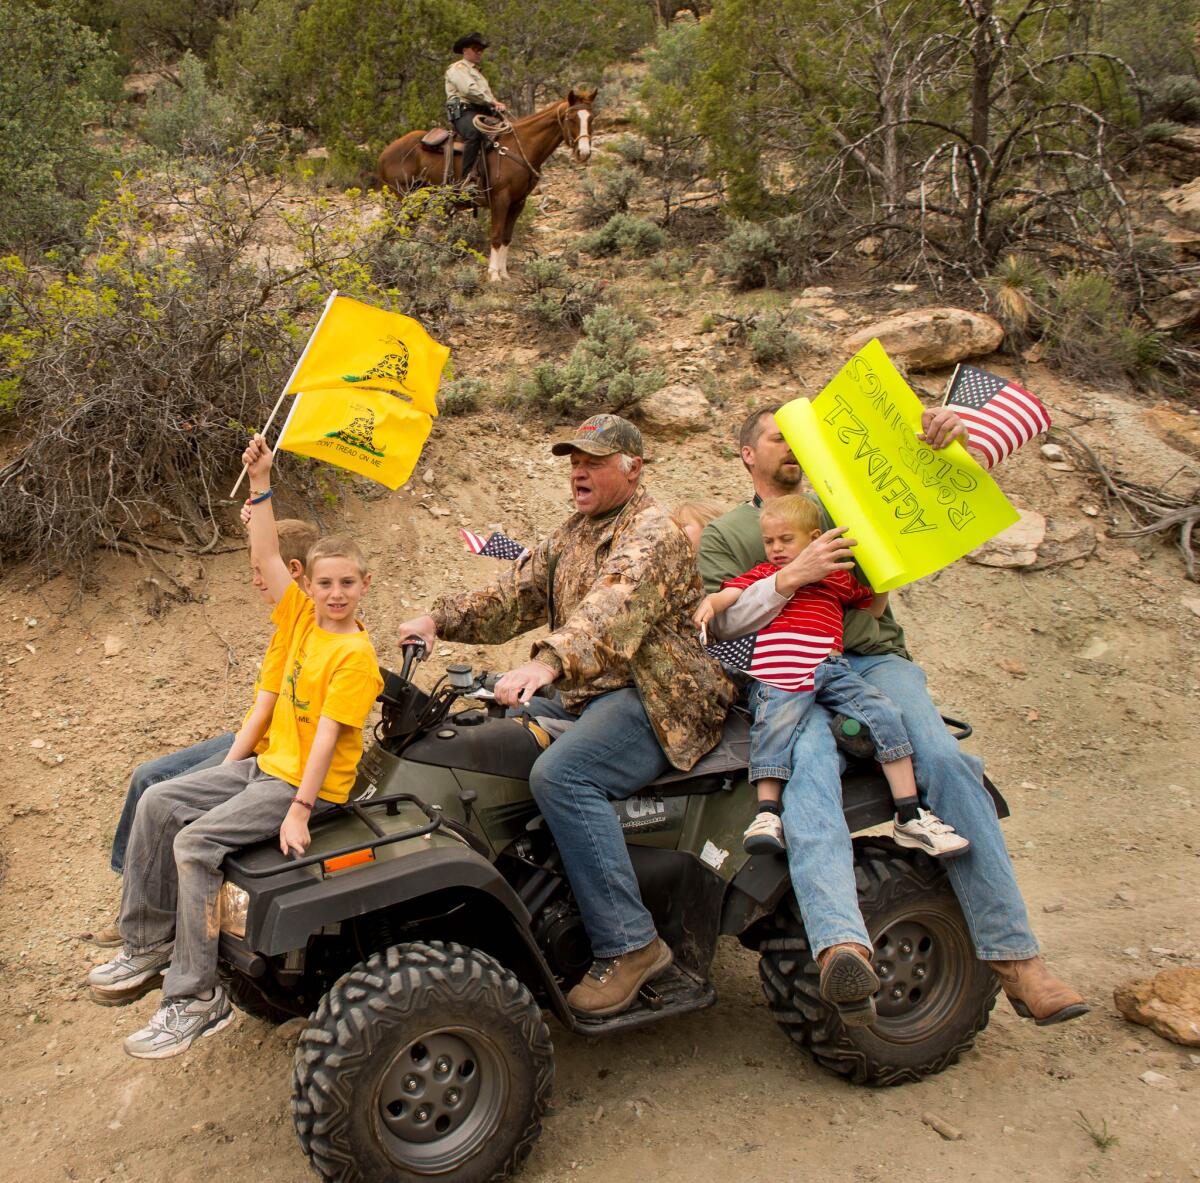 On May 10, 2014, demonstrators rode ATVs into Recapture Canyon in Utah to protest what they called the federal government's overreaching control of public lands. The area has been closed to motorized use to protect Native American ruins.